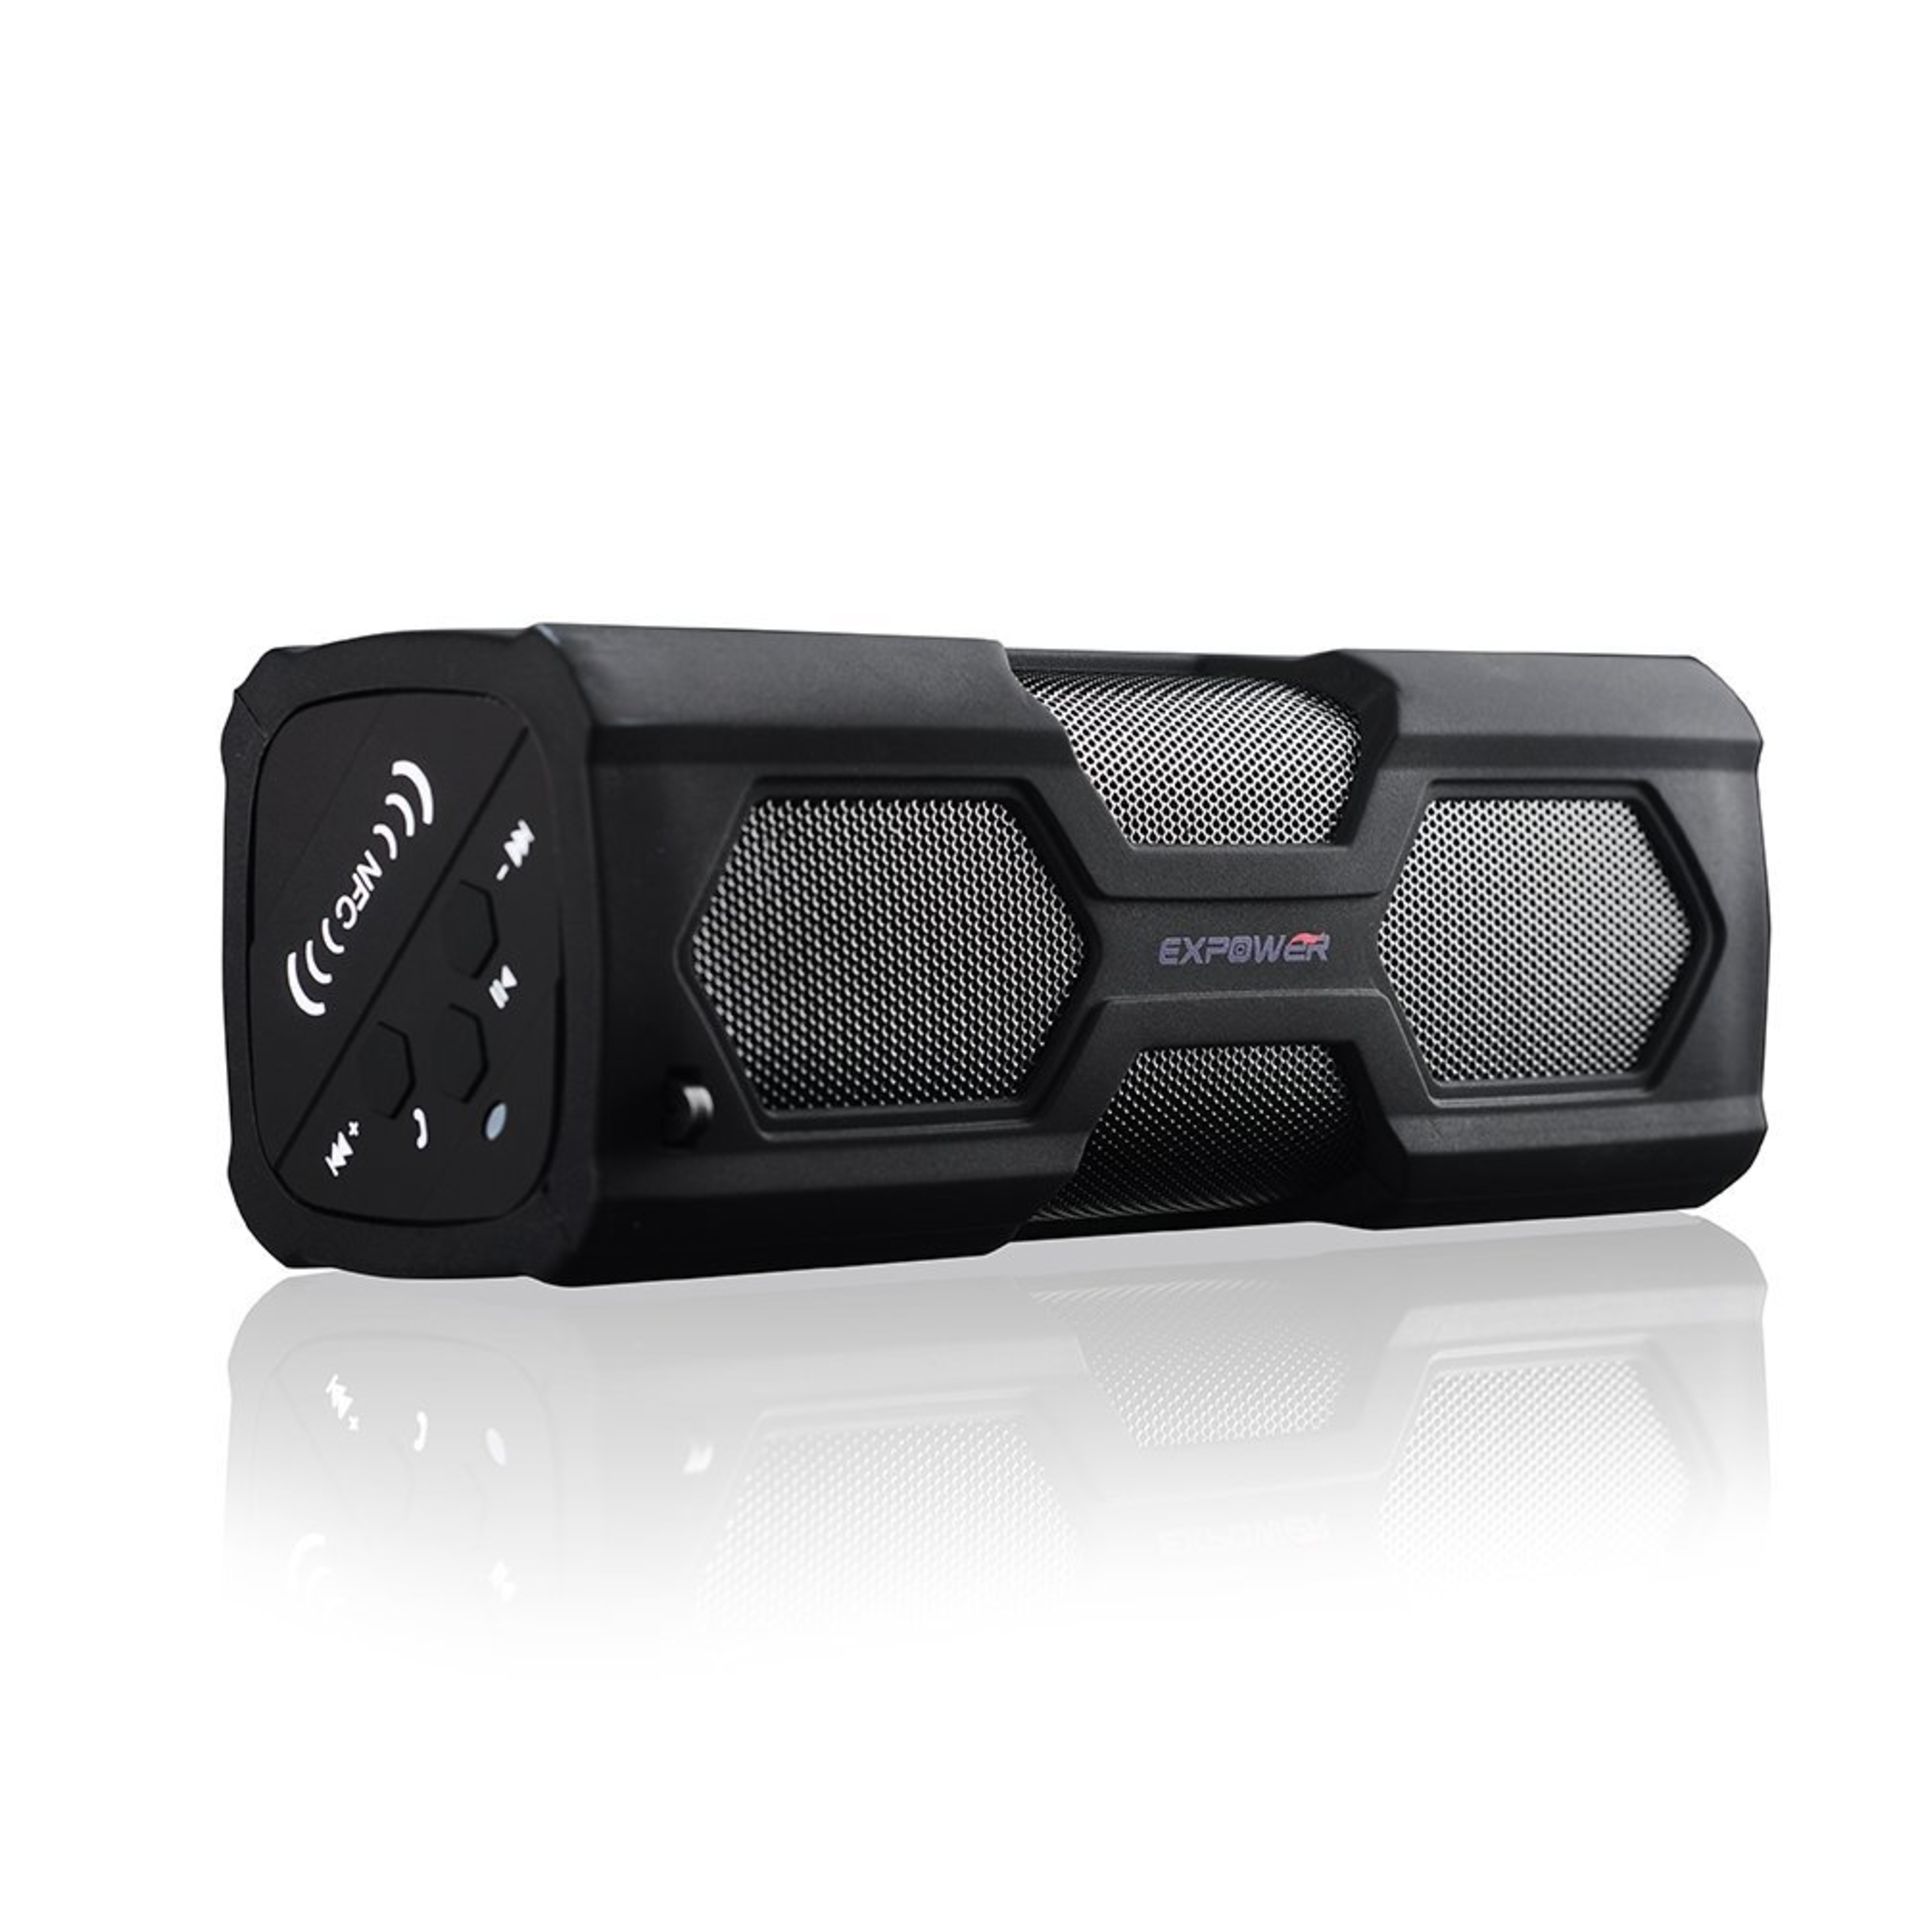 V Brand New Bluetooth Speaker And Power Bank Waterproof And Shockproof - Amazon Price £22.99